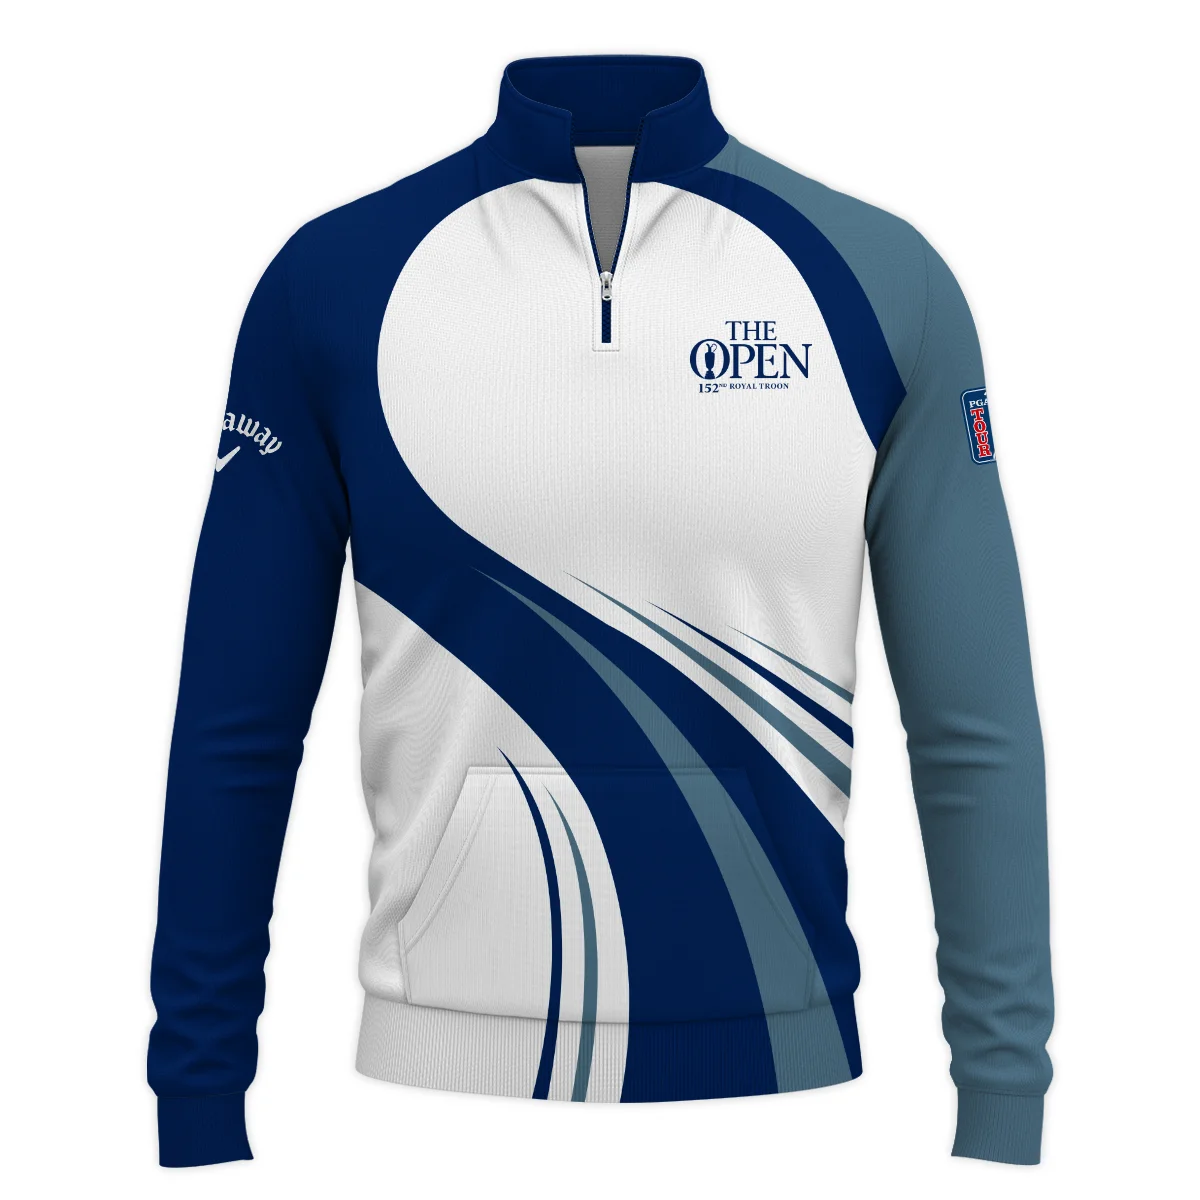 152nd Open Championship Callaway White Mostly Desaturated Dark Blue Performance Quarter Zip Sweatshirt With Pockets All Over Prints HOTOP270624A02CLWTS